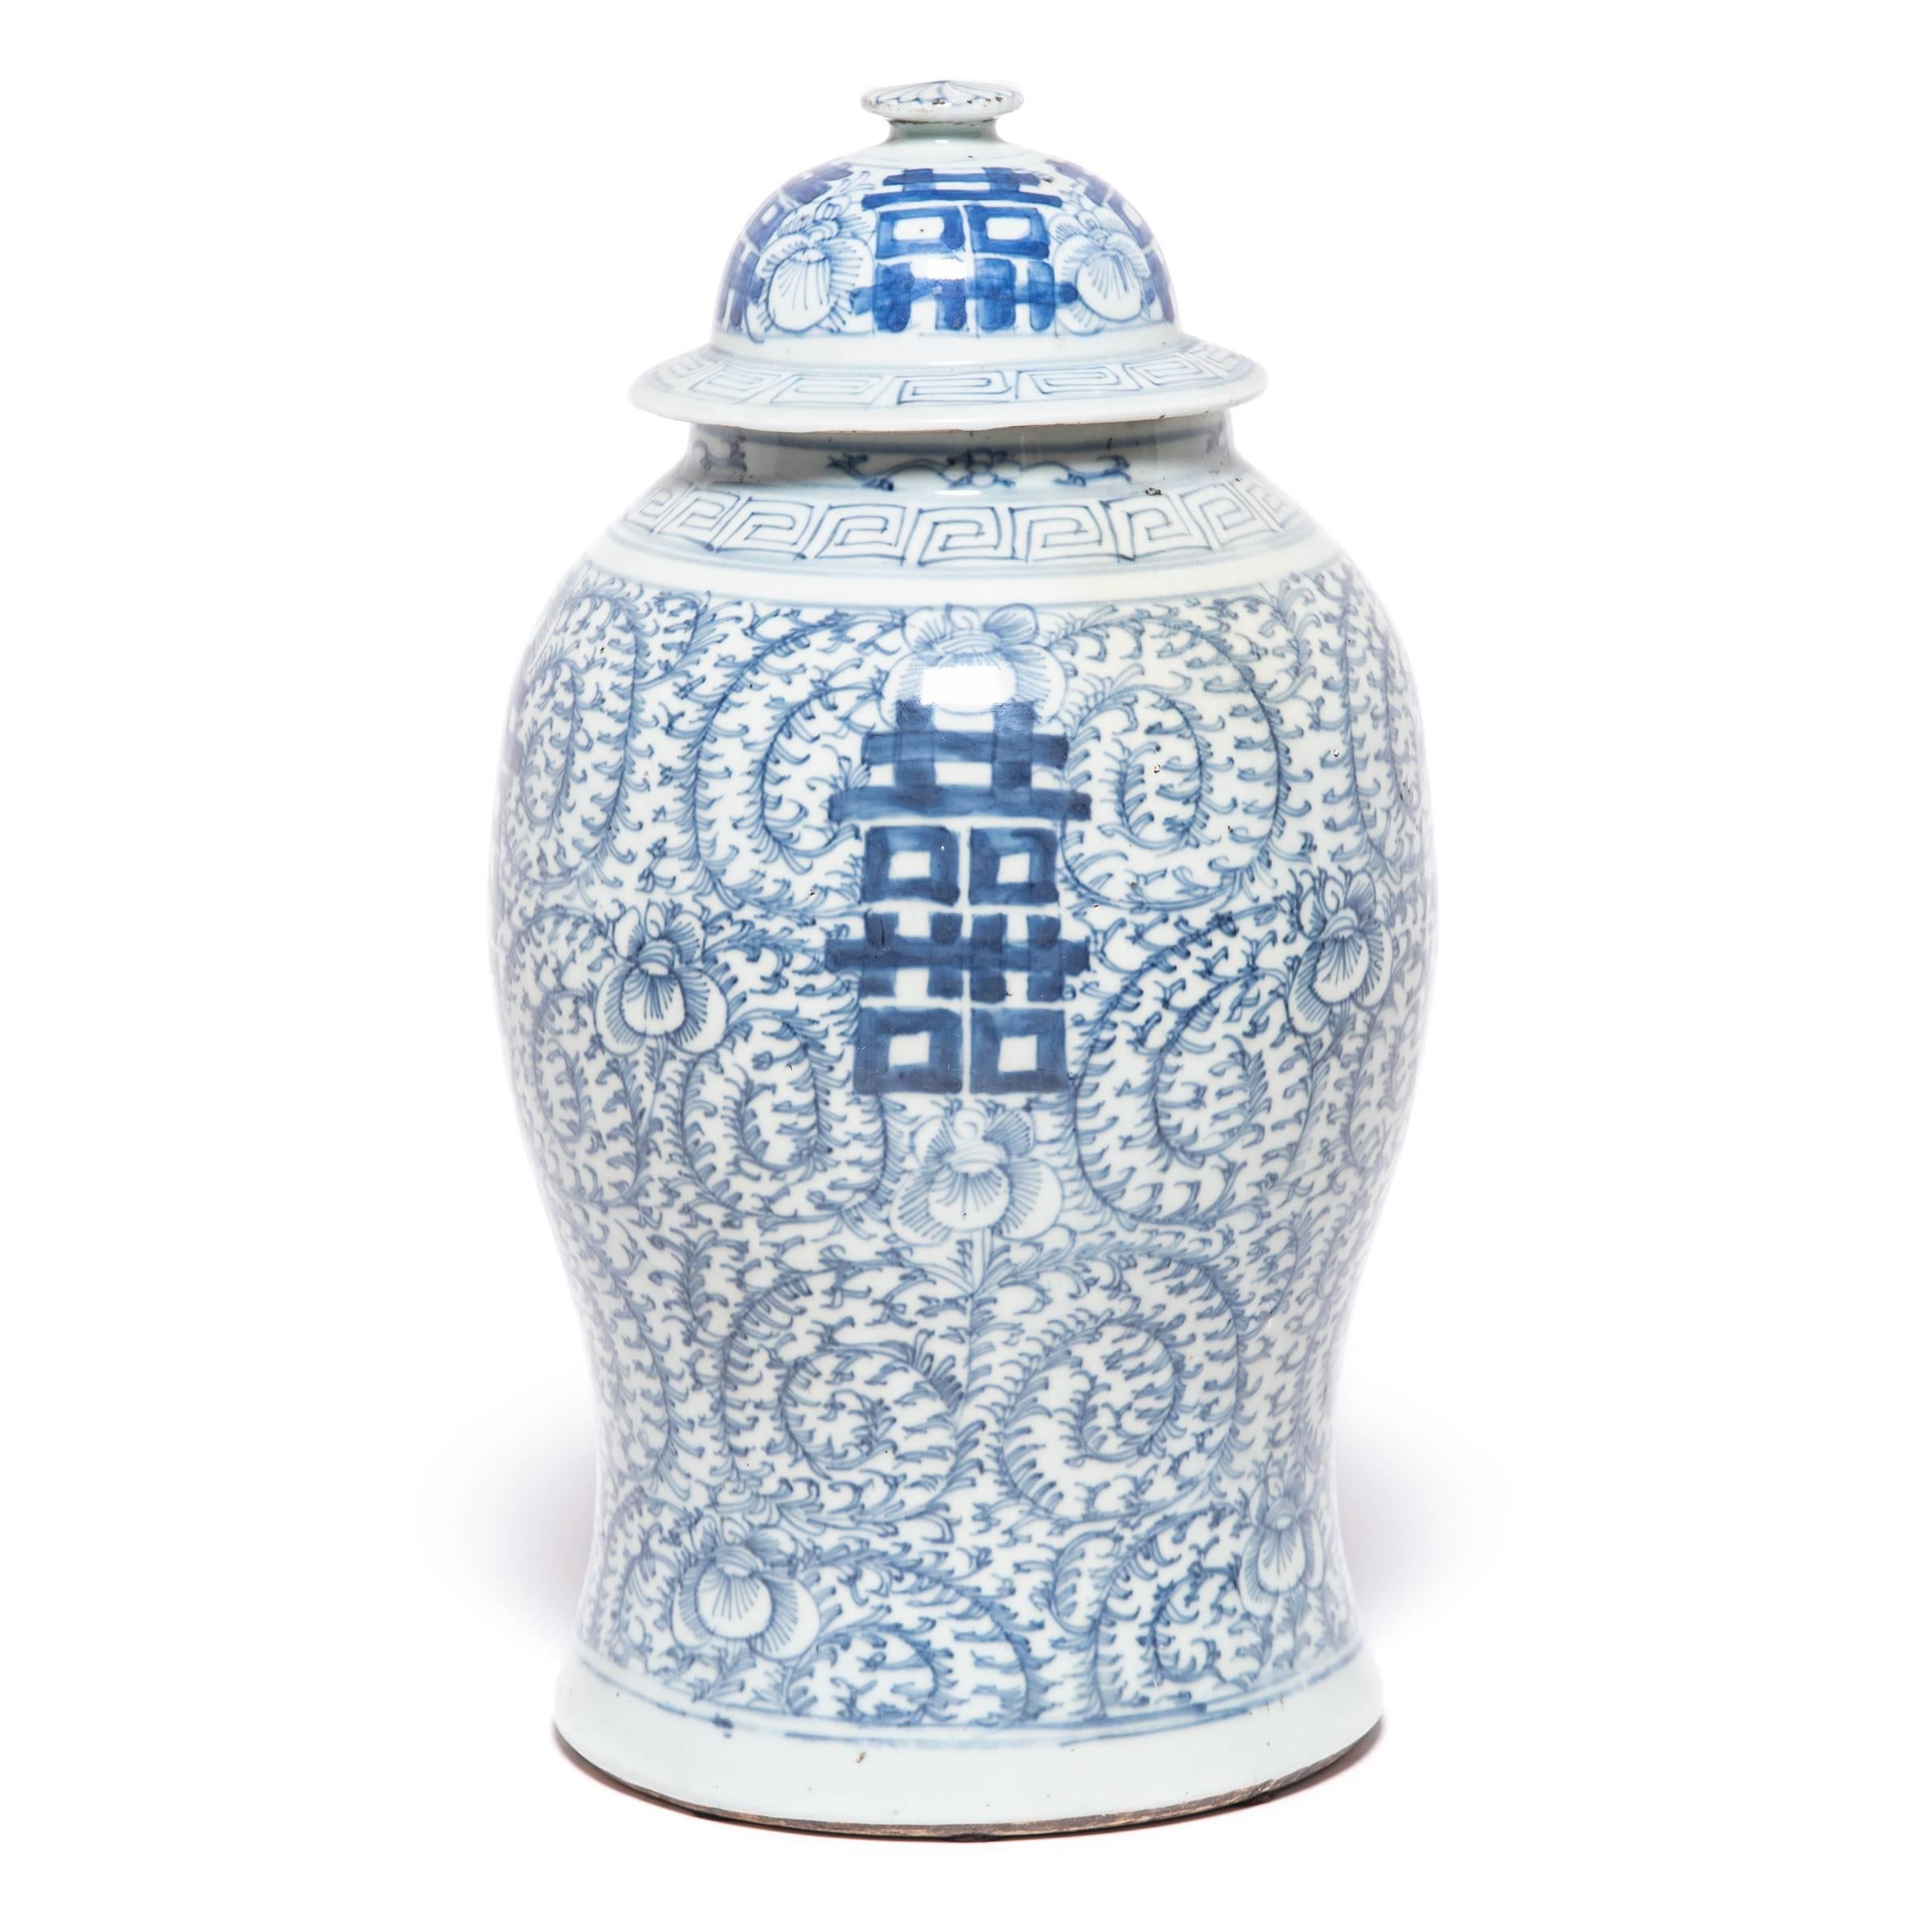 This blue and white ginger jar, which was originally intended for storing spices, is hand painted with trailing vines and the character for 